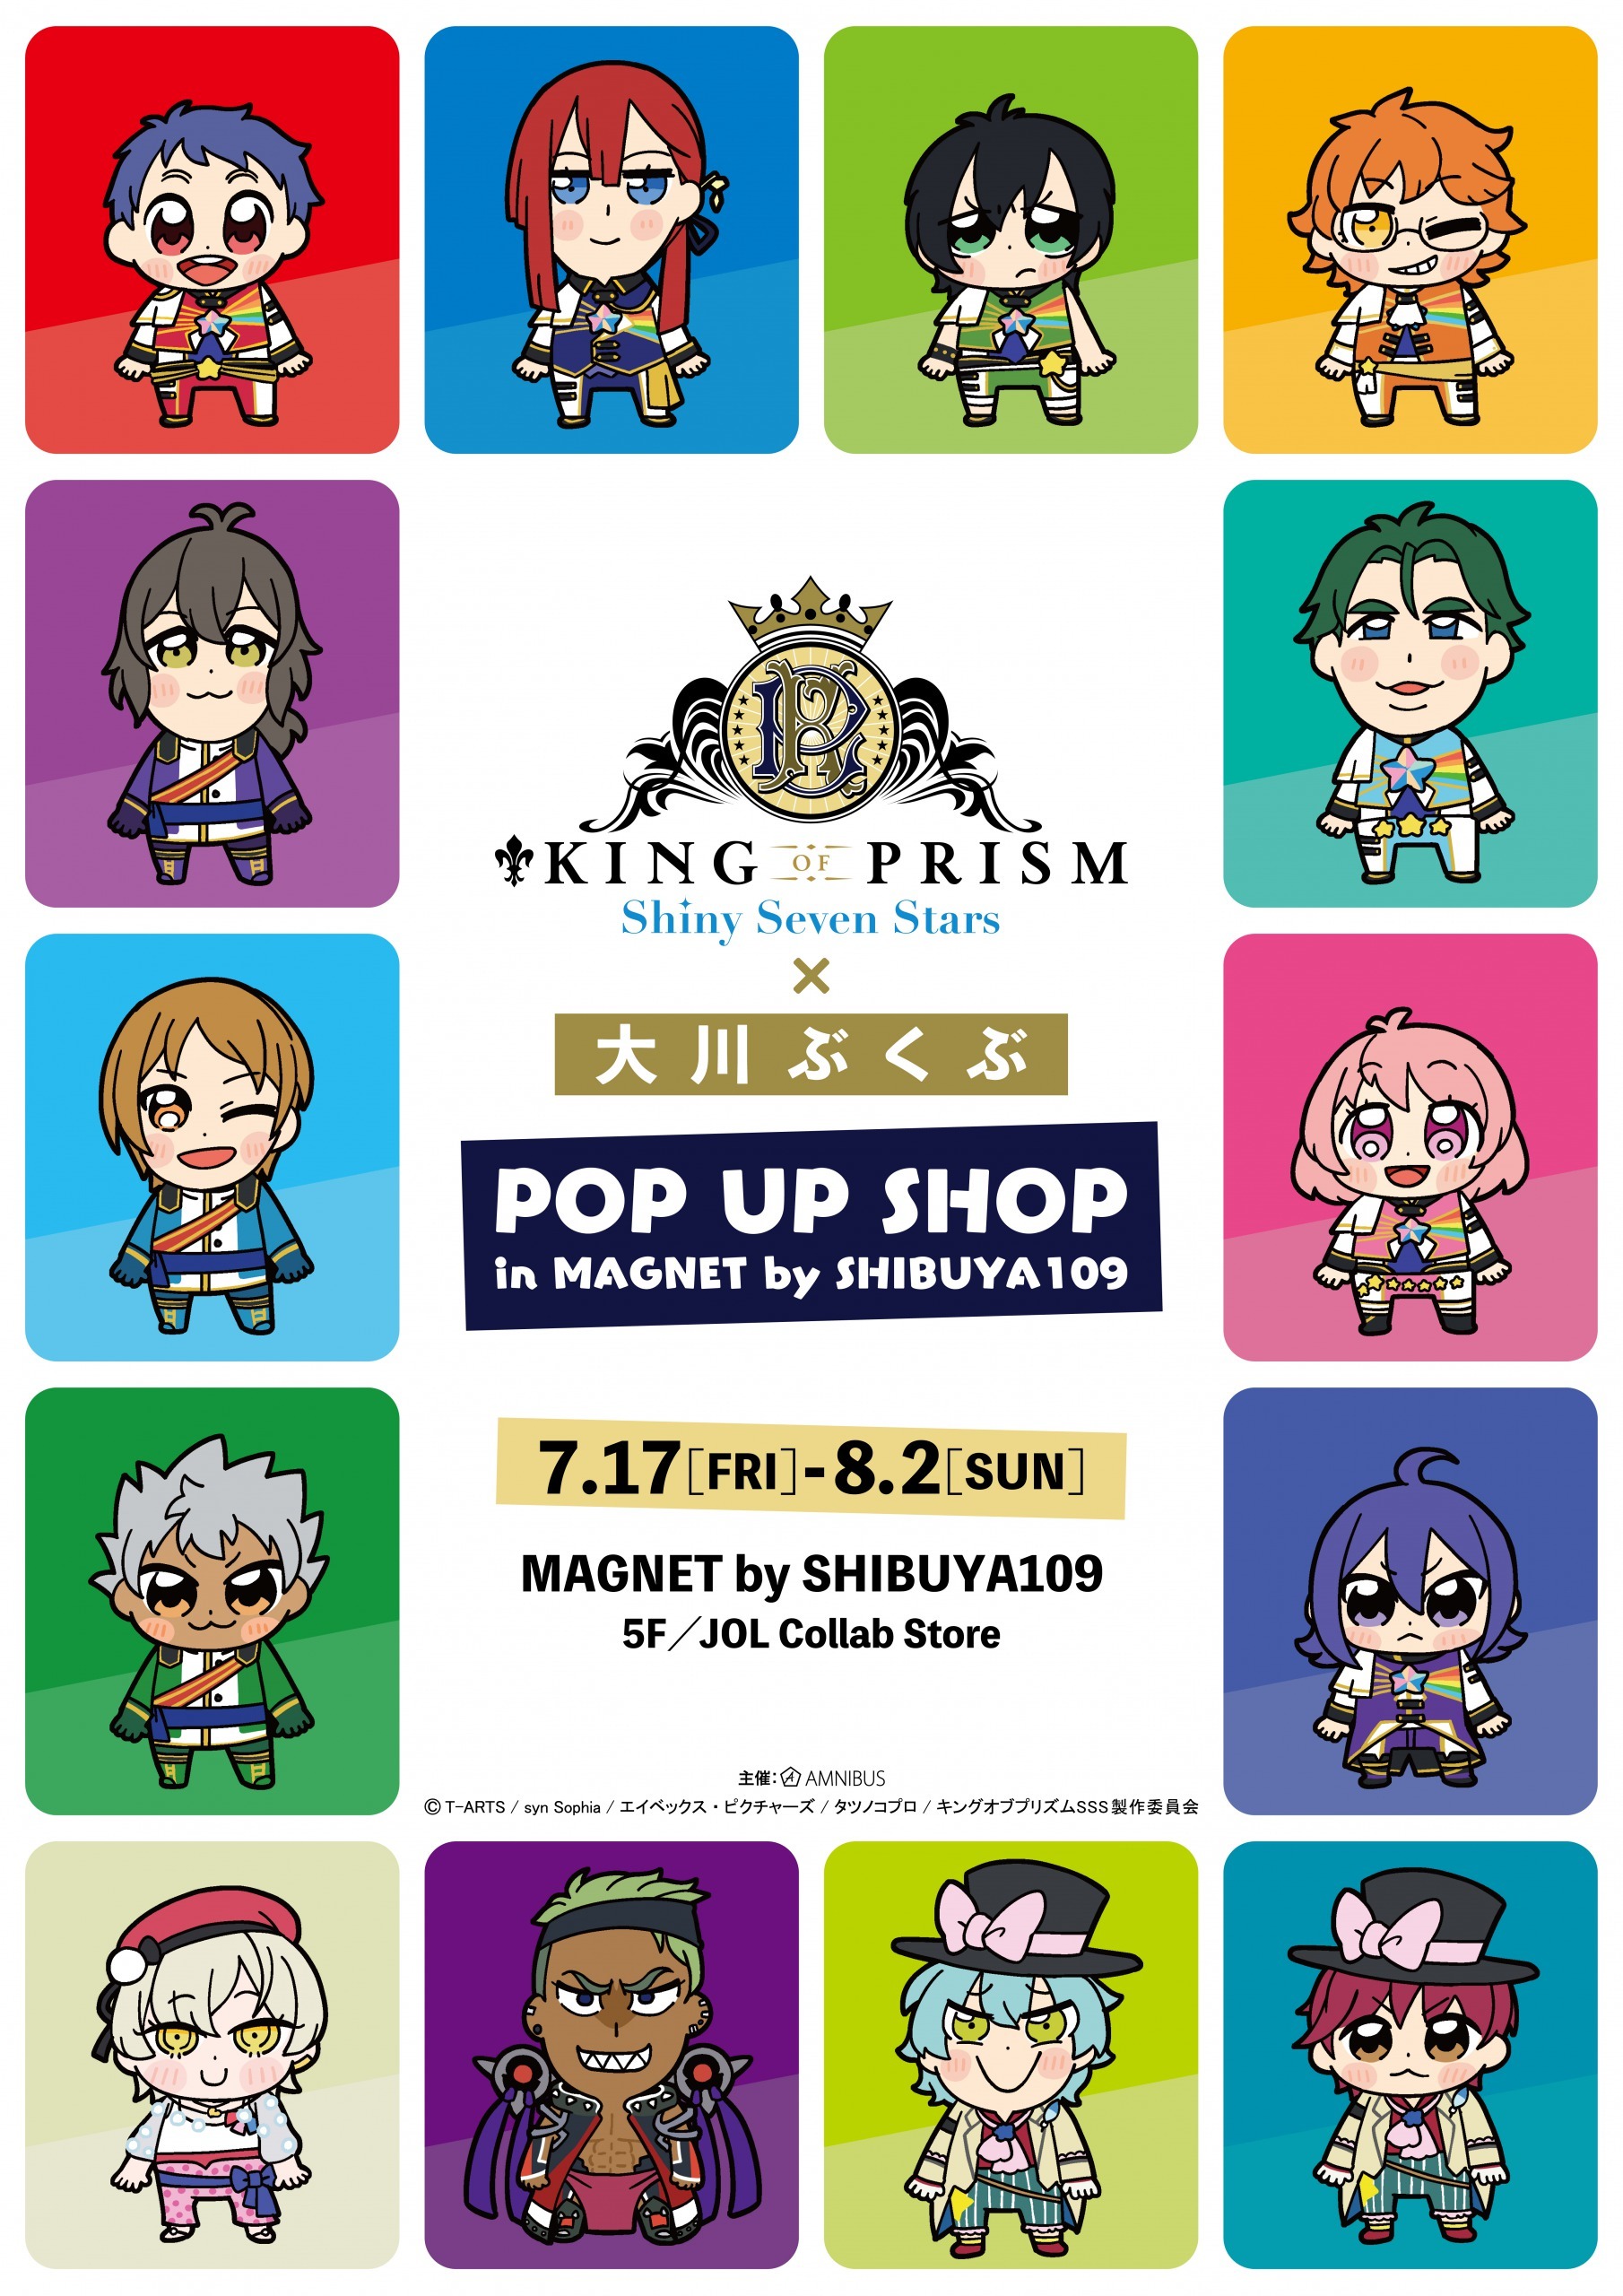 「KING OF PRISM -Shiny Seven Stars-×大川ぶくぶ POP UP SHOP in MAGNET by SHIBUYA109」